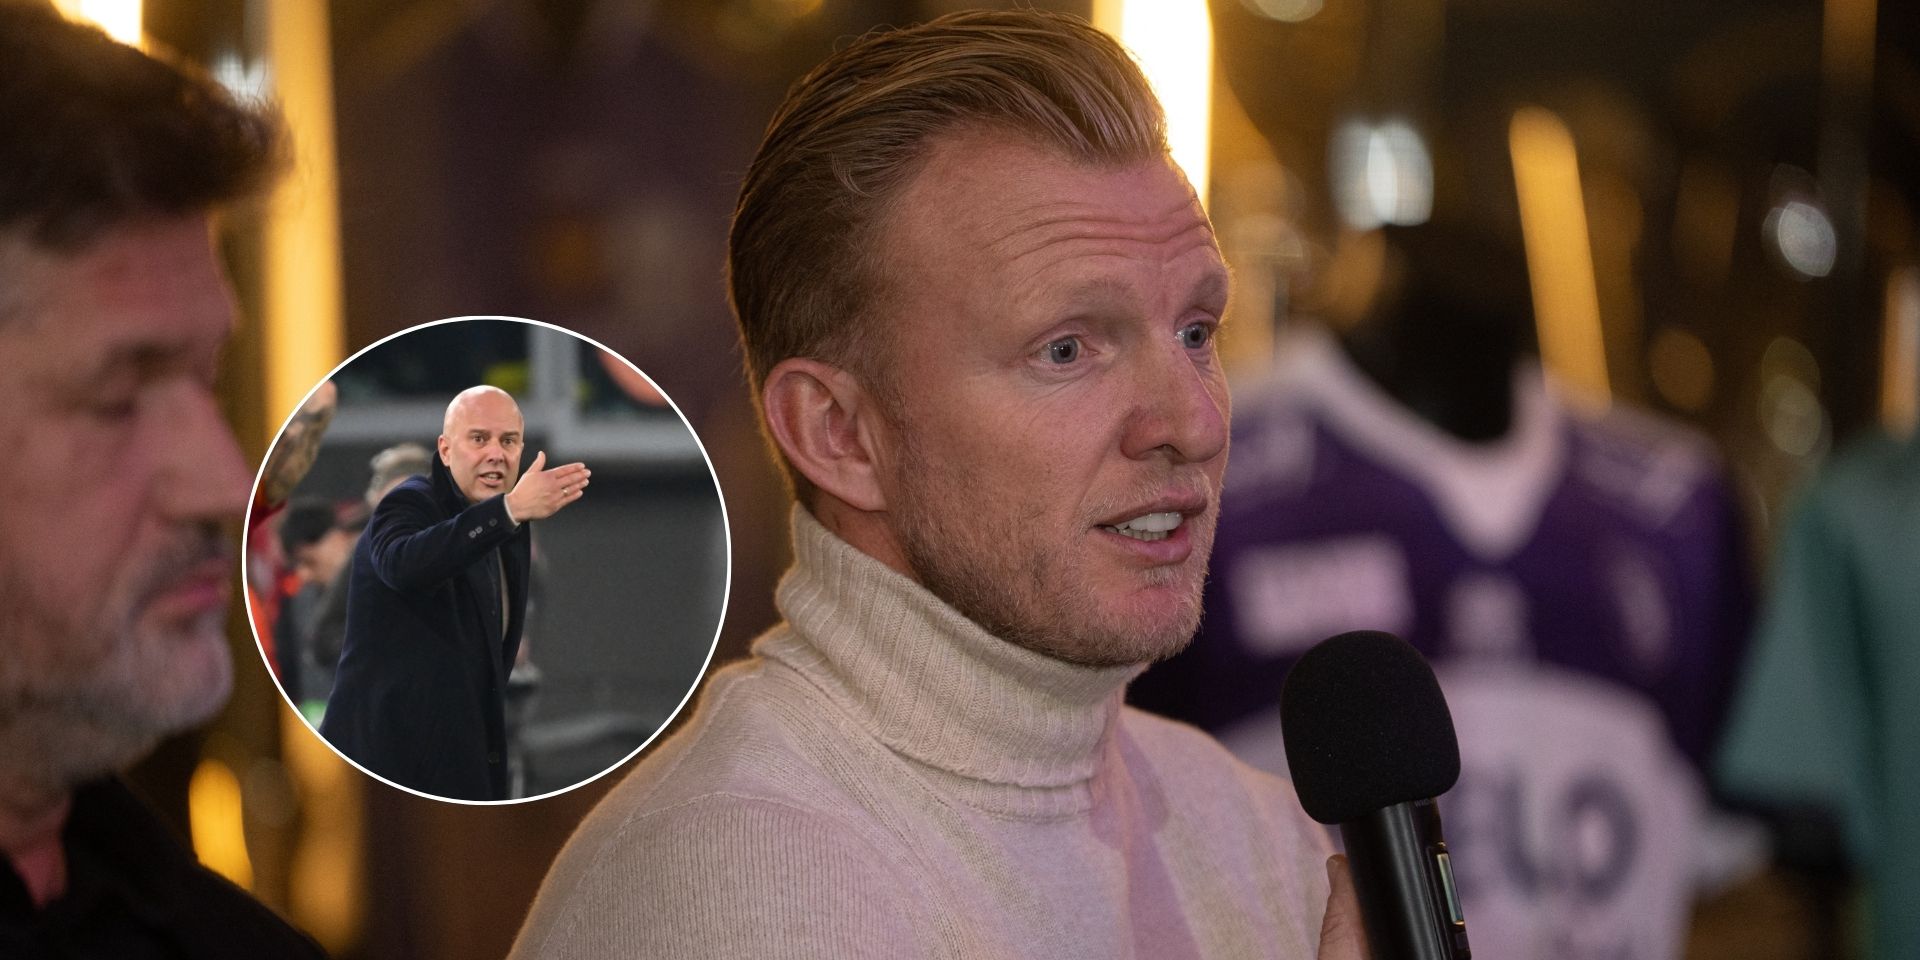 Dirk Kuyt compares Arne Slot’s style to Klopp, Mourinho and Guardiola